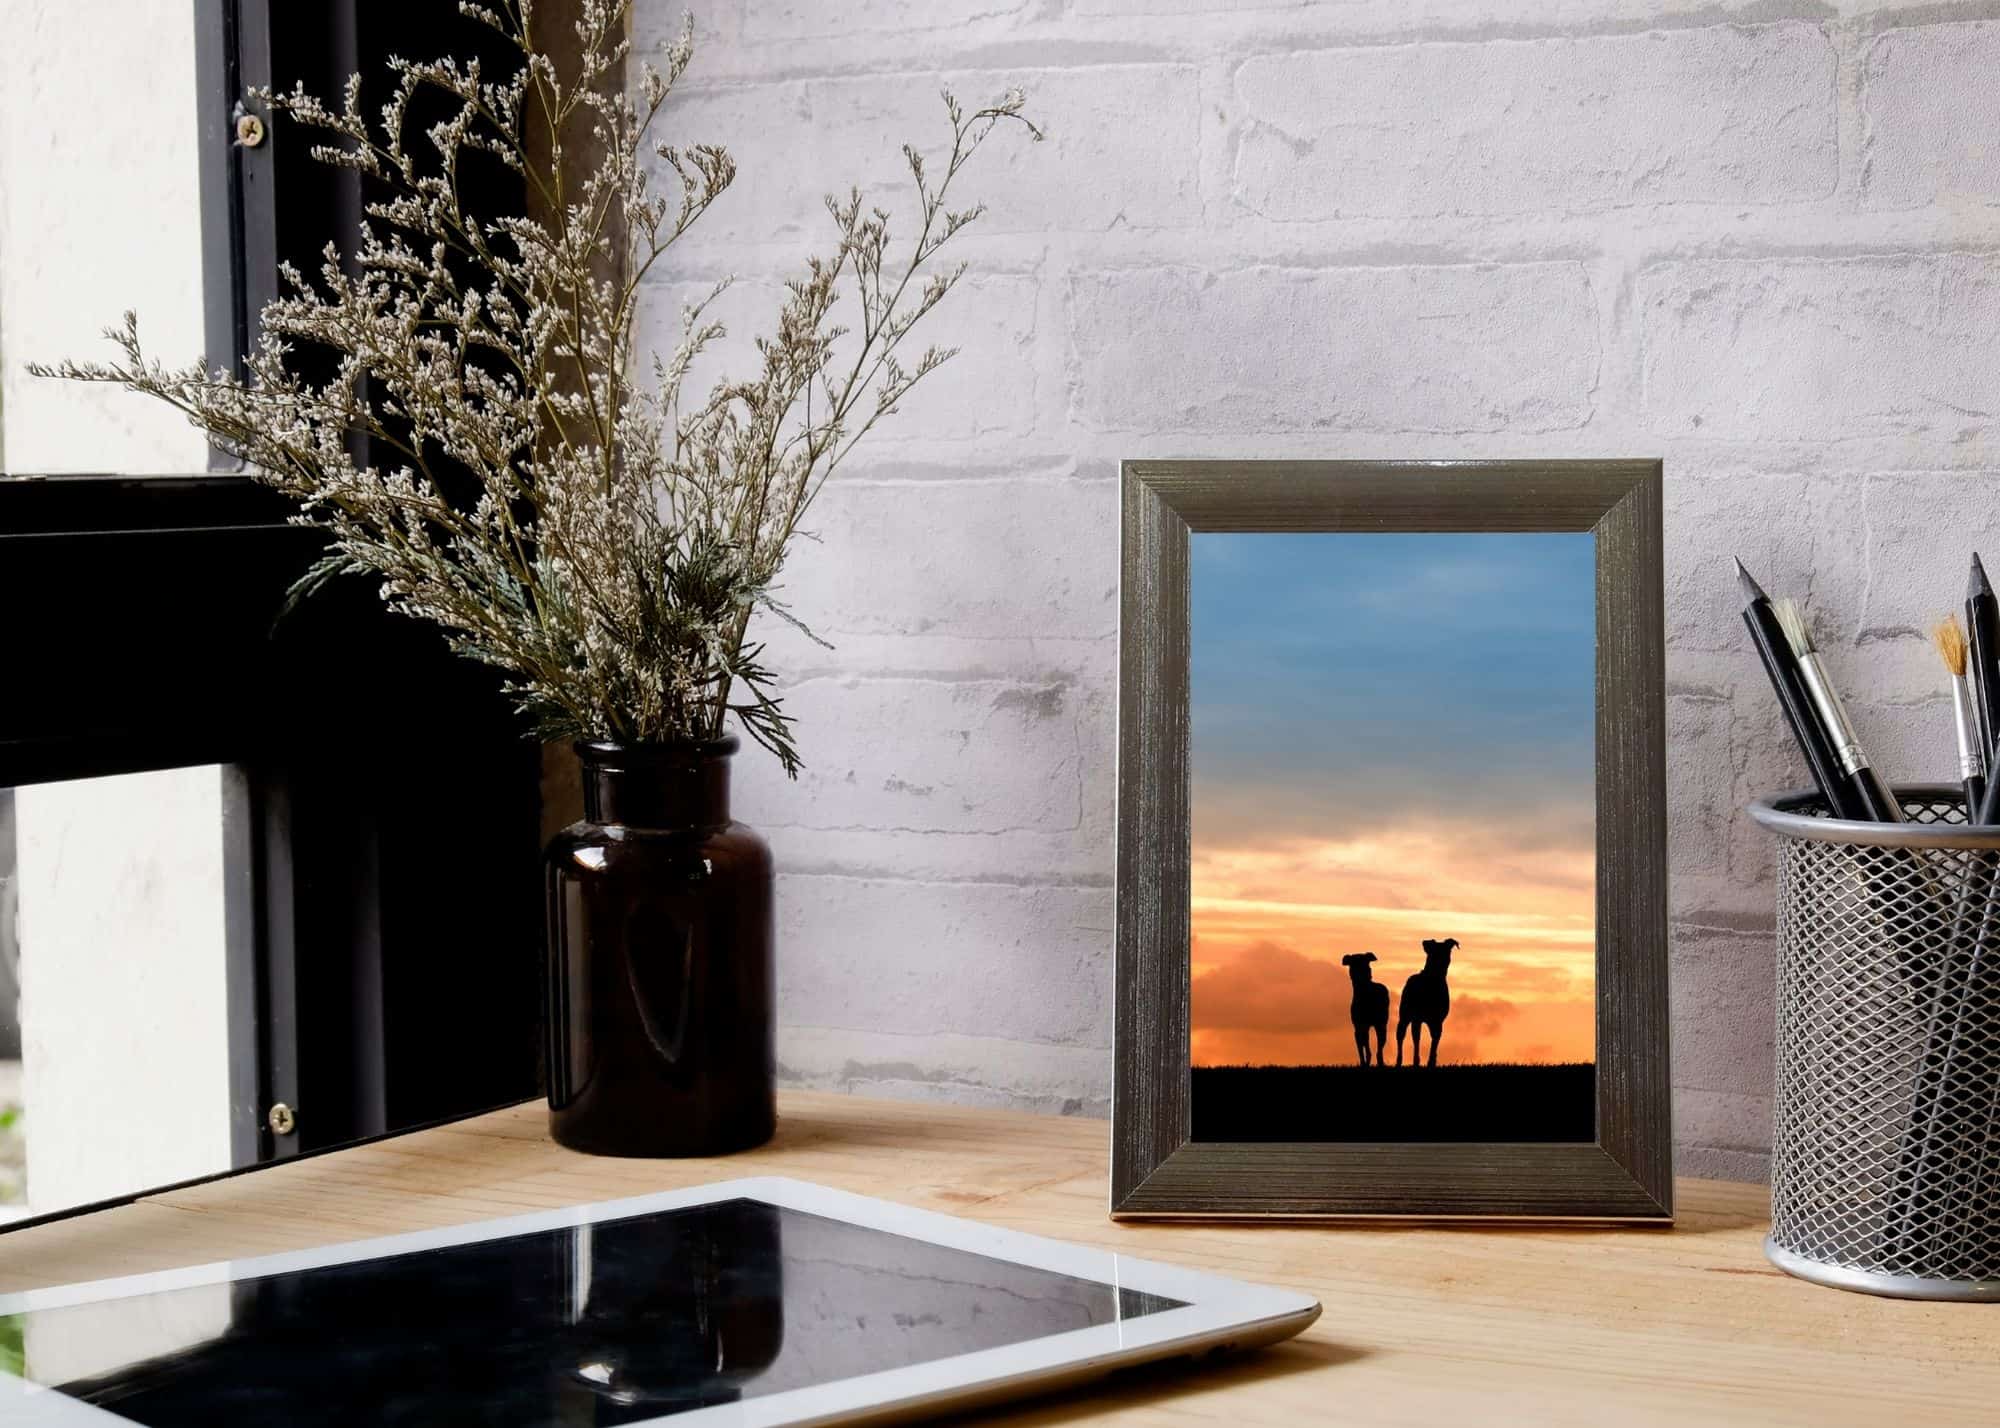 a tidy desk with a small framed gift print of two greyhound silhouettes against a colorful sunset sky